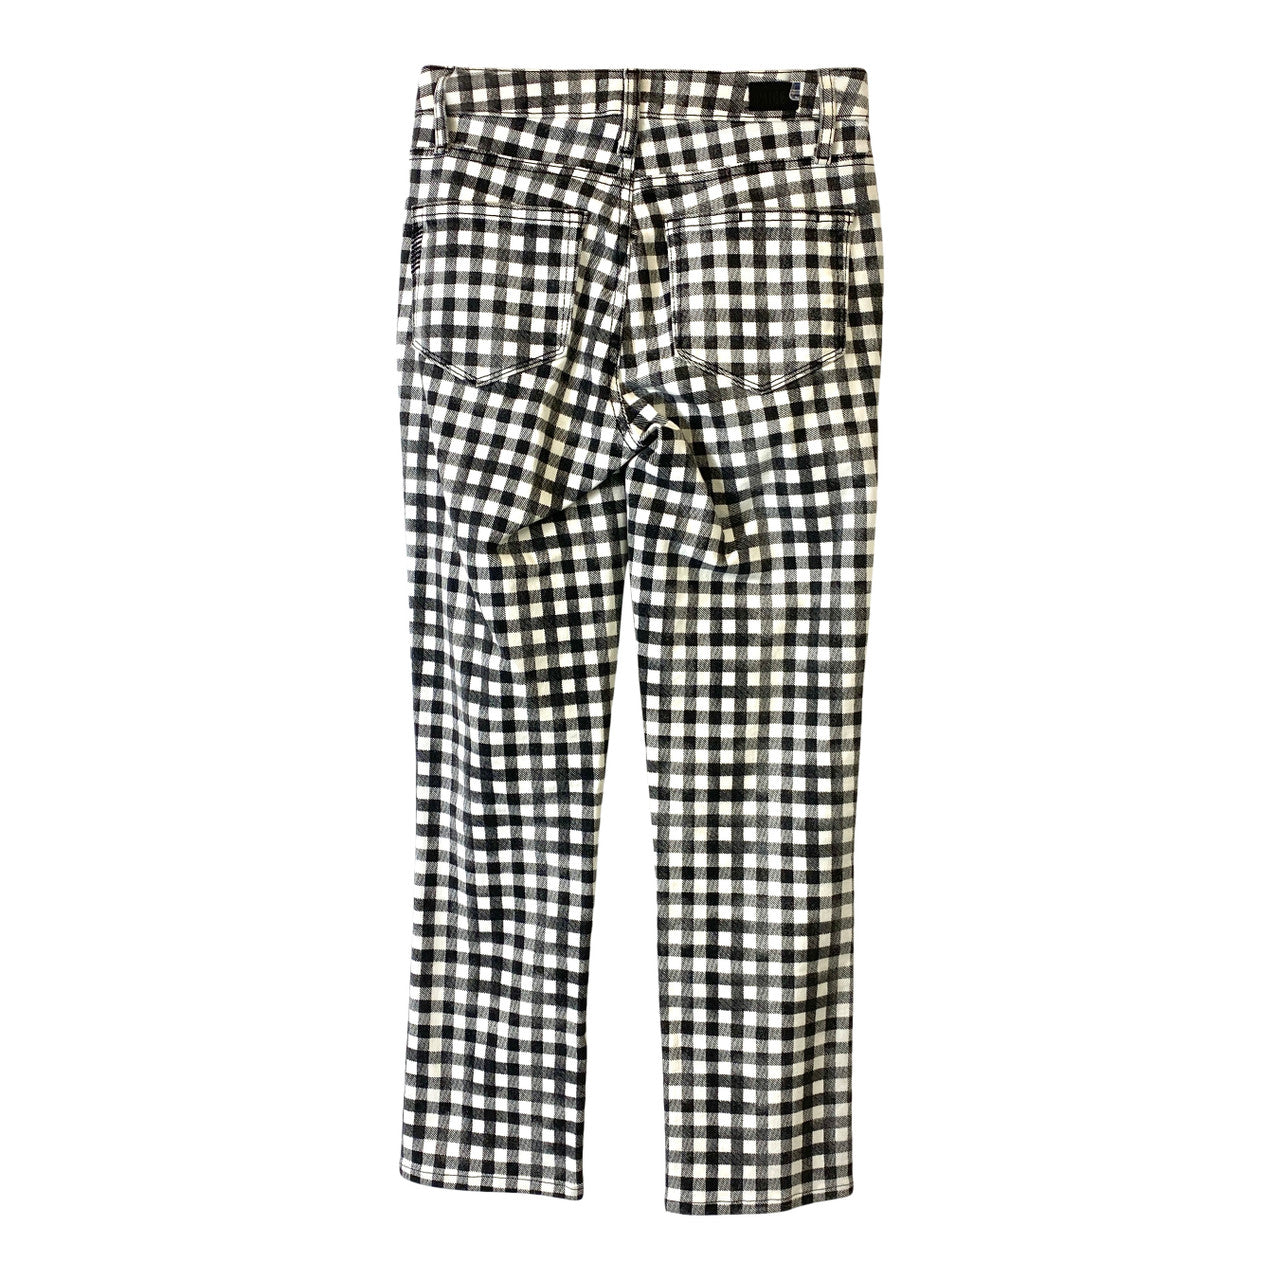 Paige Hoxton Gingham Skinny Jeans- Back